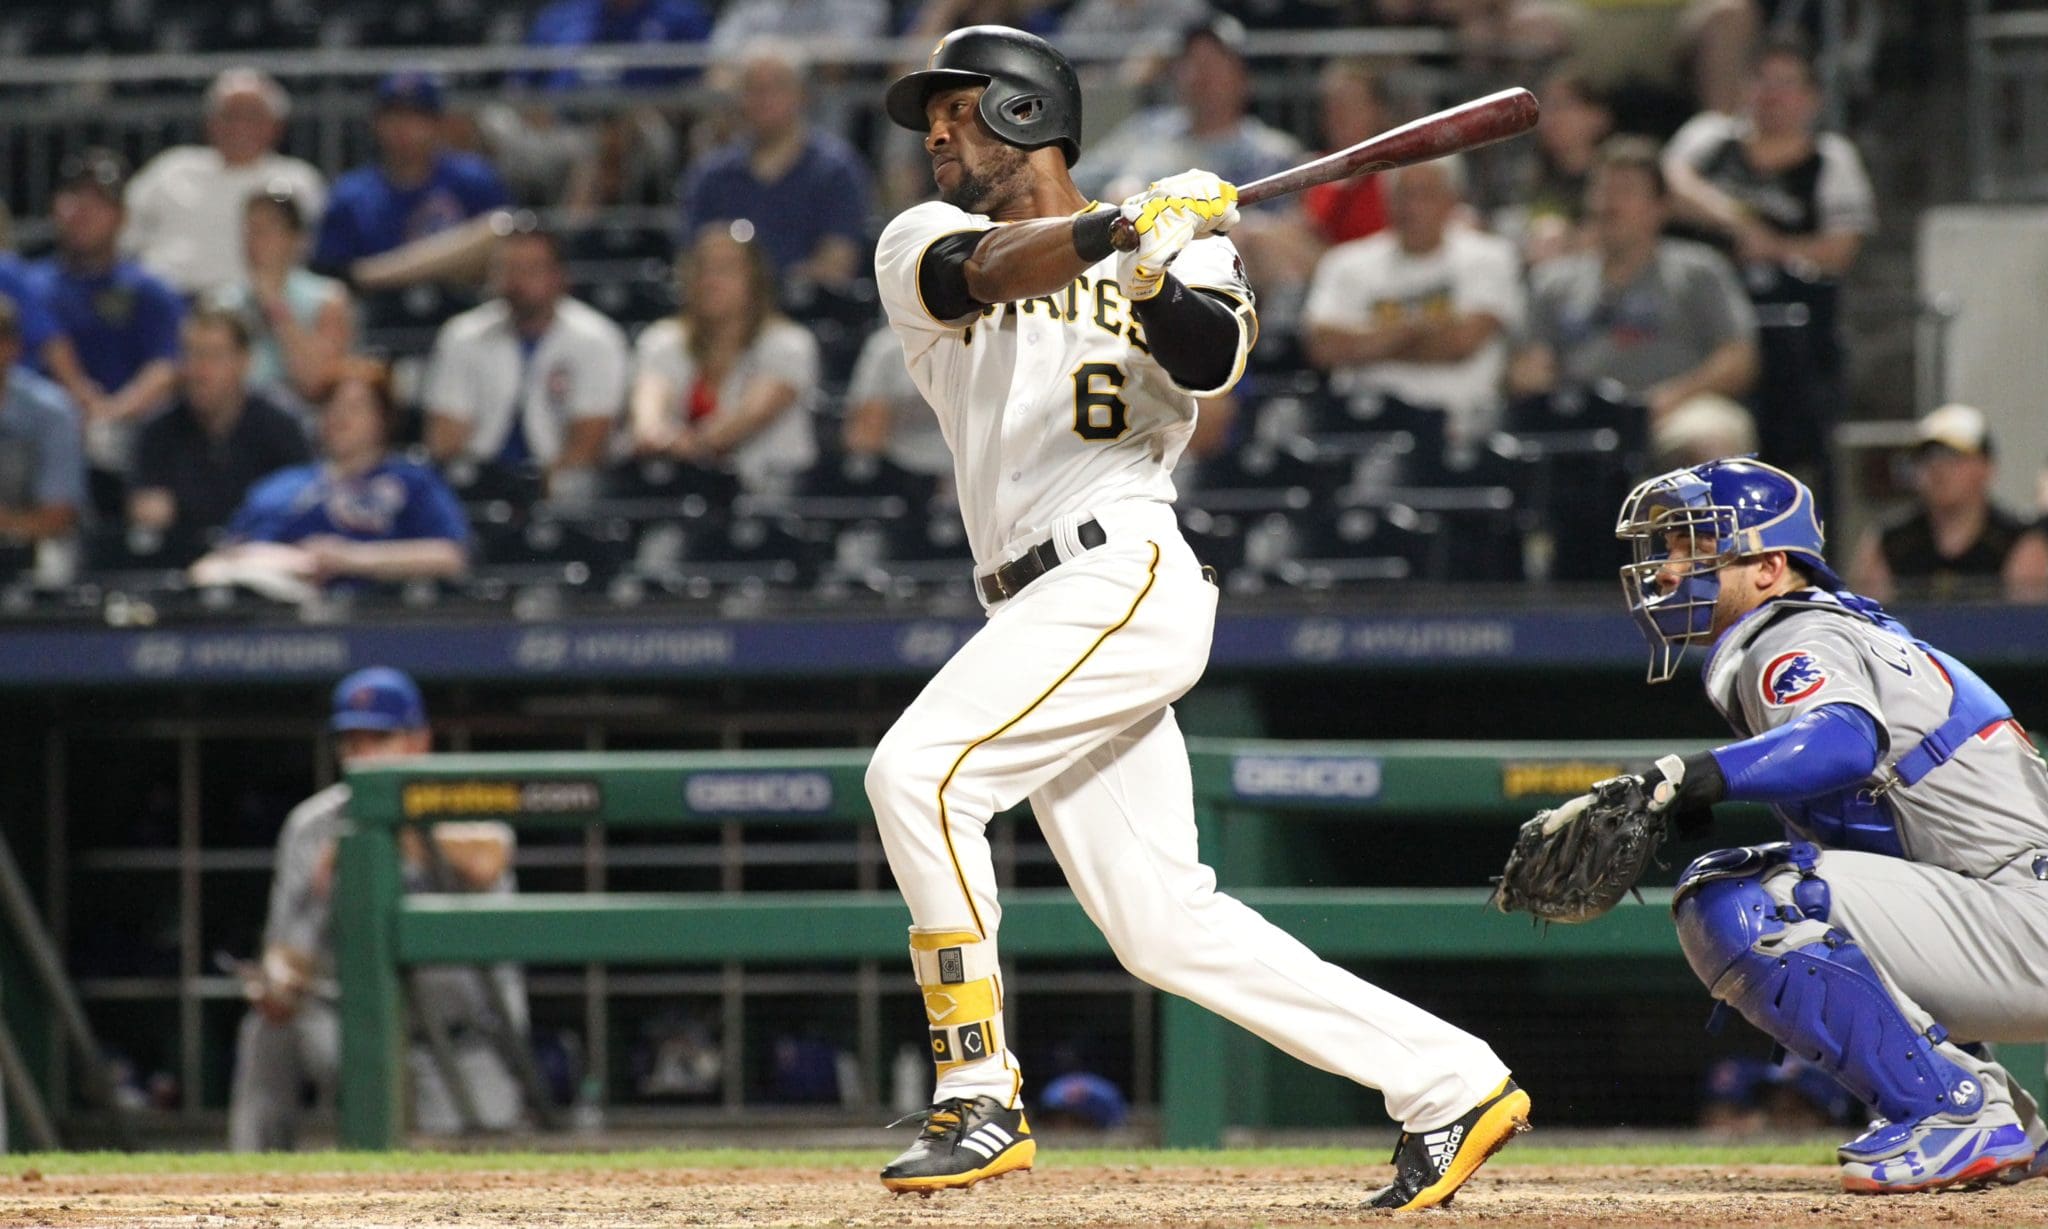 Starling Marte brings 'brand-new mentality' to Pirates' spring training